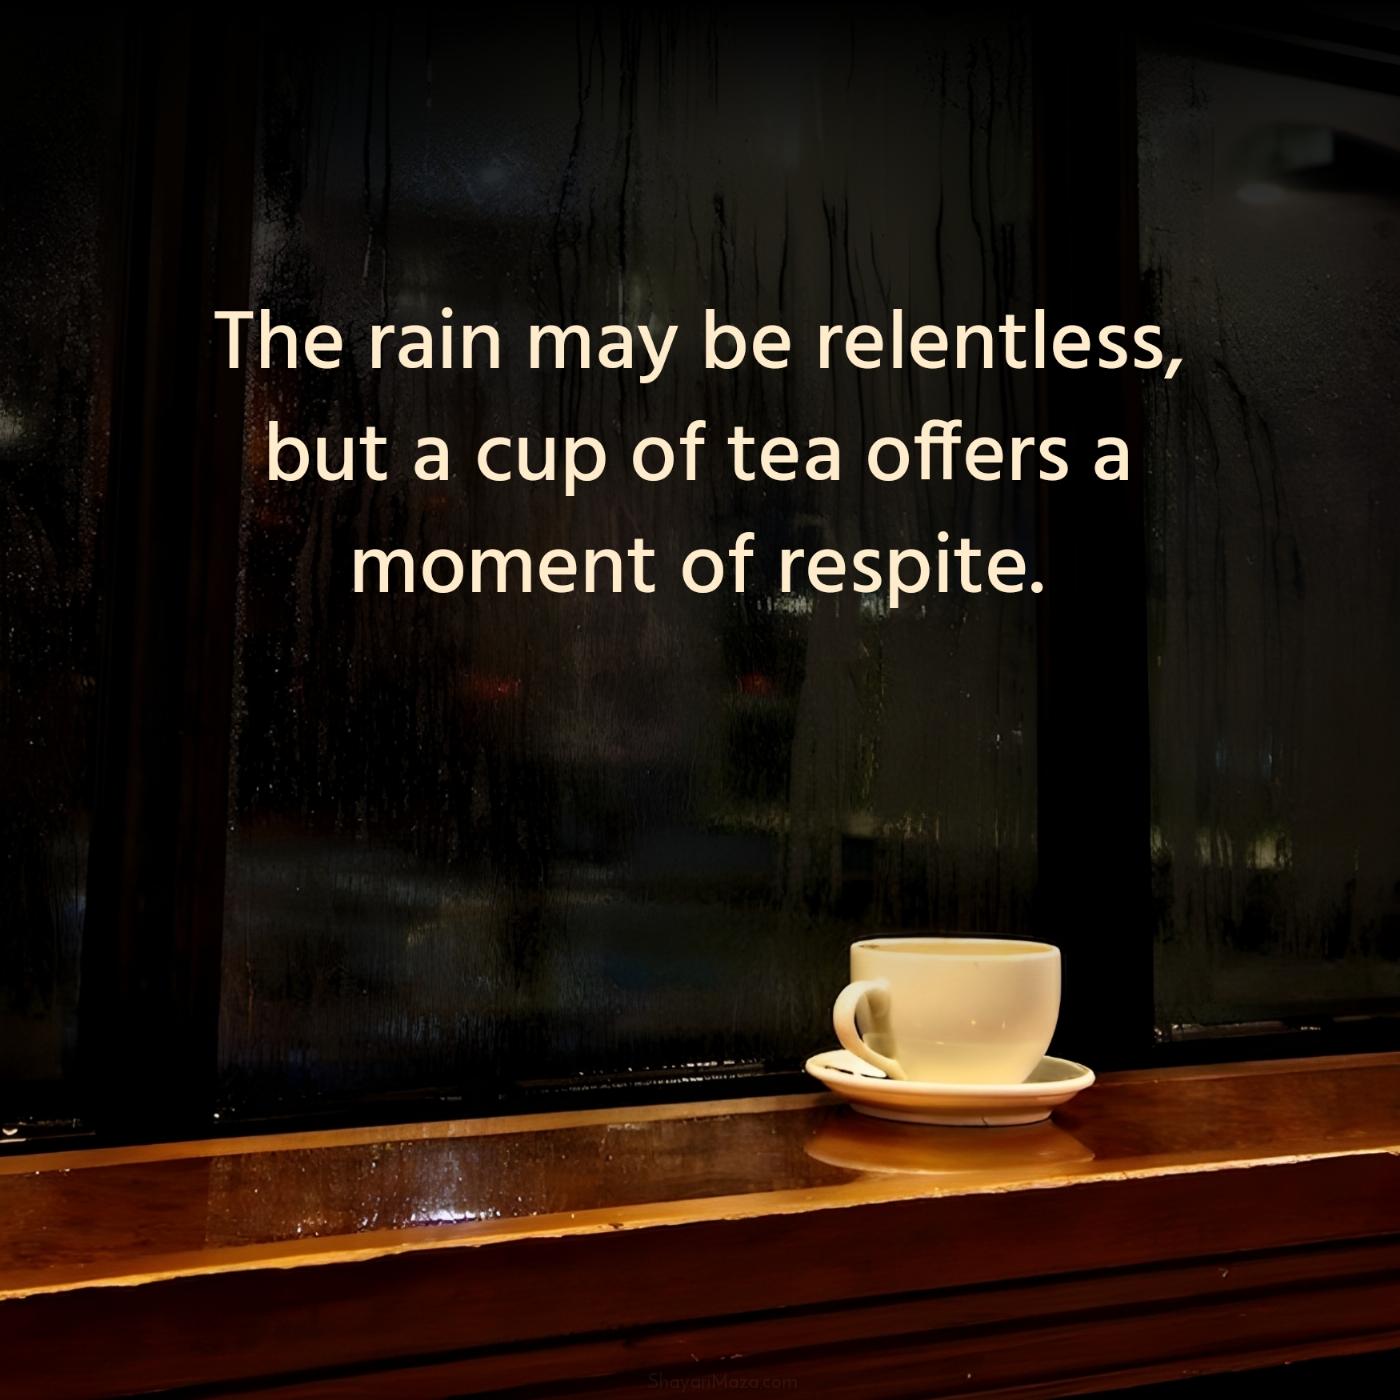 The rain may be relentless but a cup of tea offers a moment